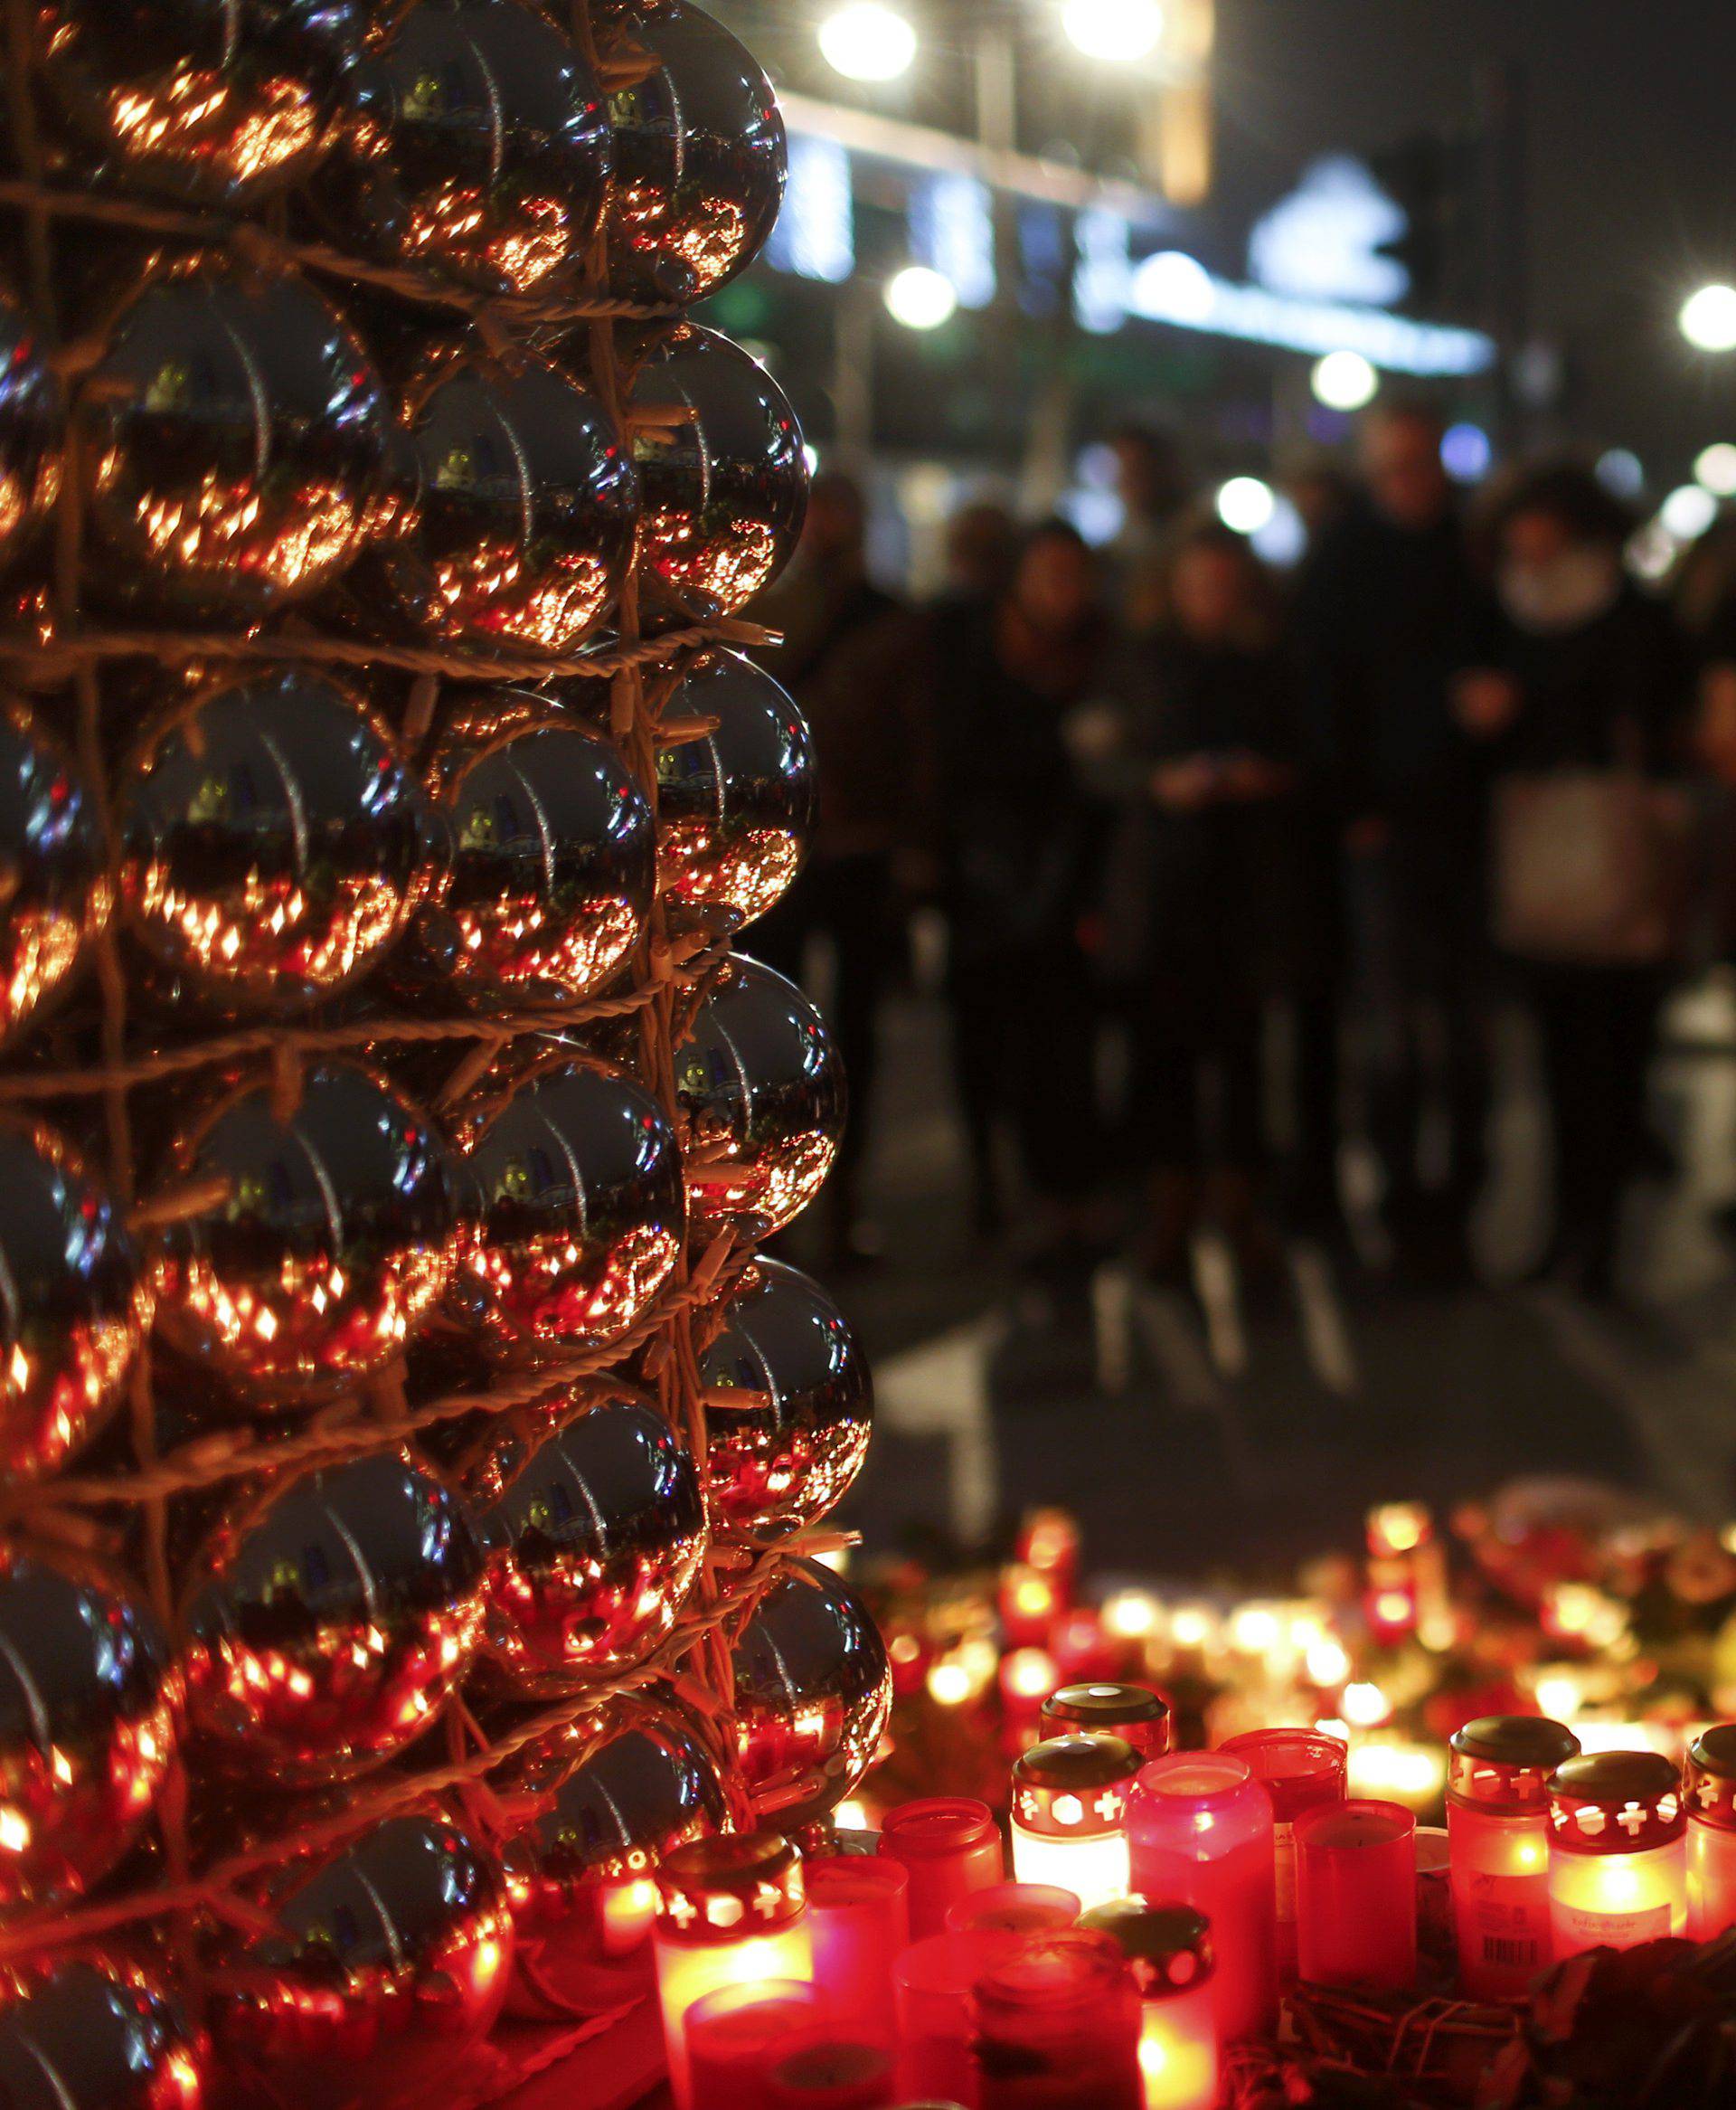 Candles burn at a Christmas market in Berlin,